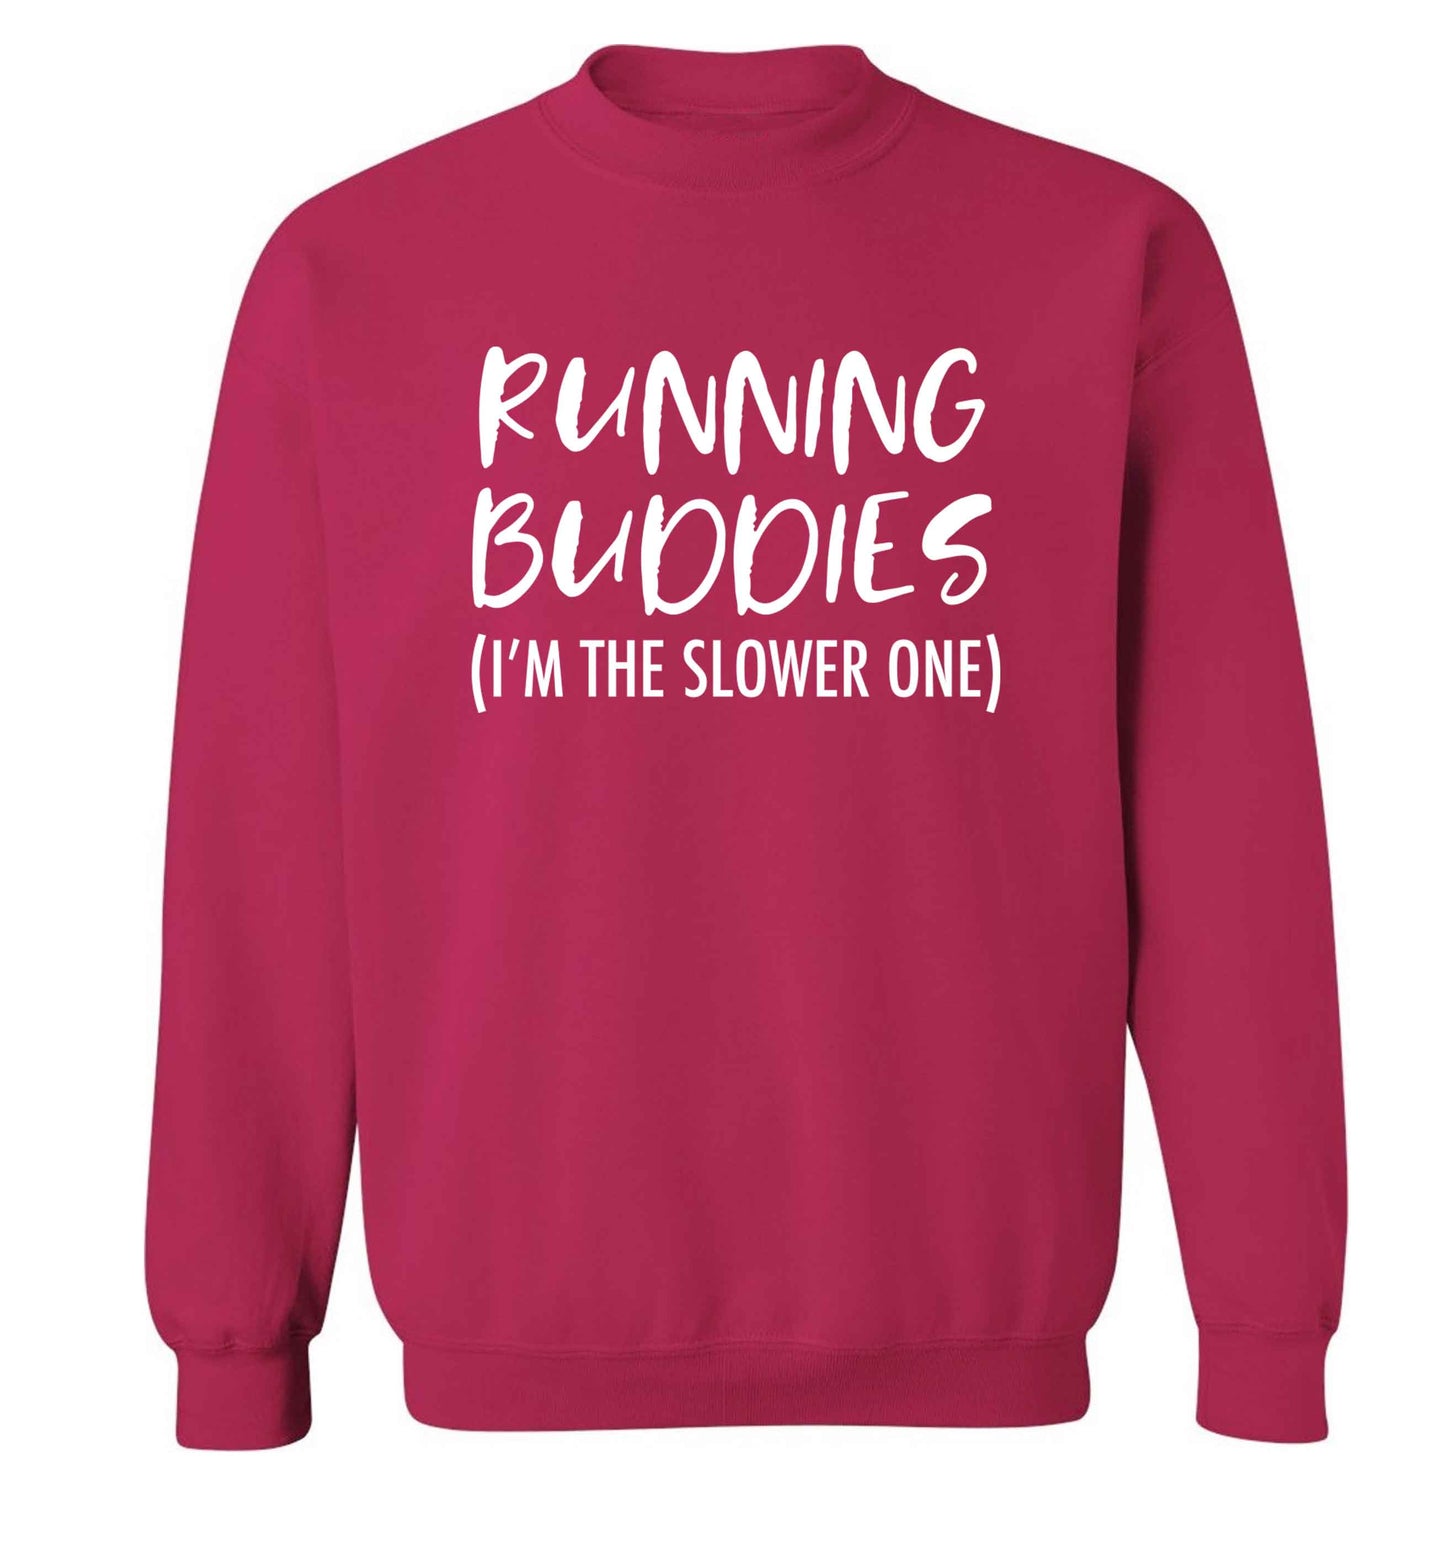 Running buddies (I'm the slower one) adult's unisex pink sweater 2XL